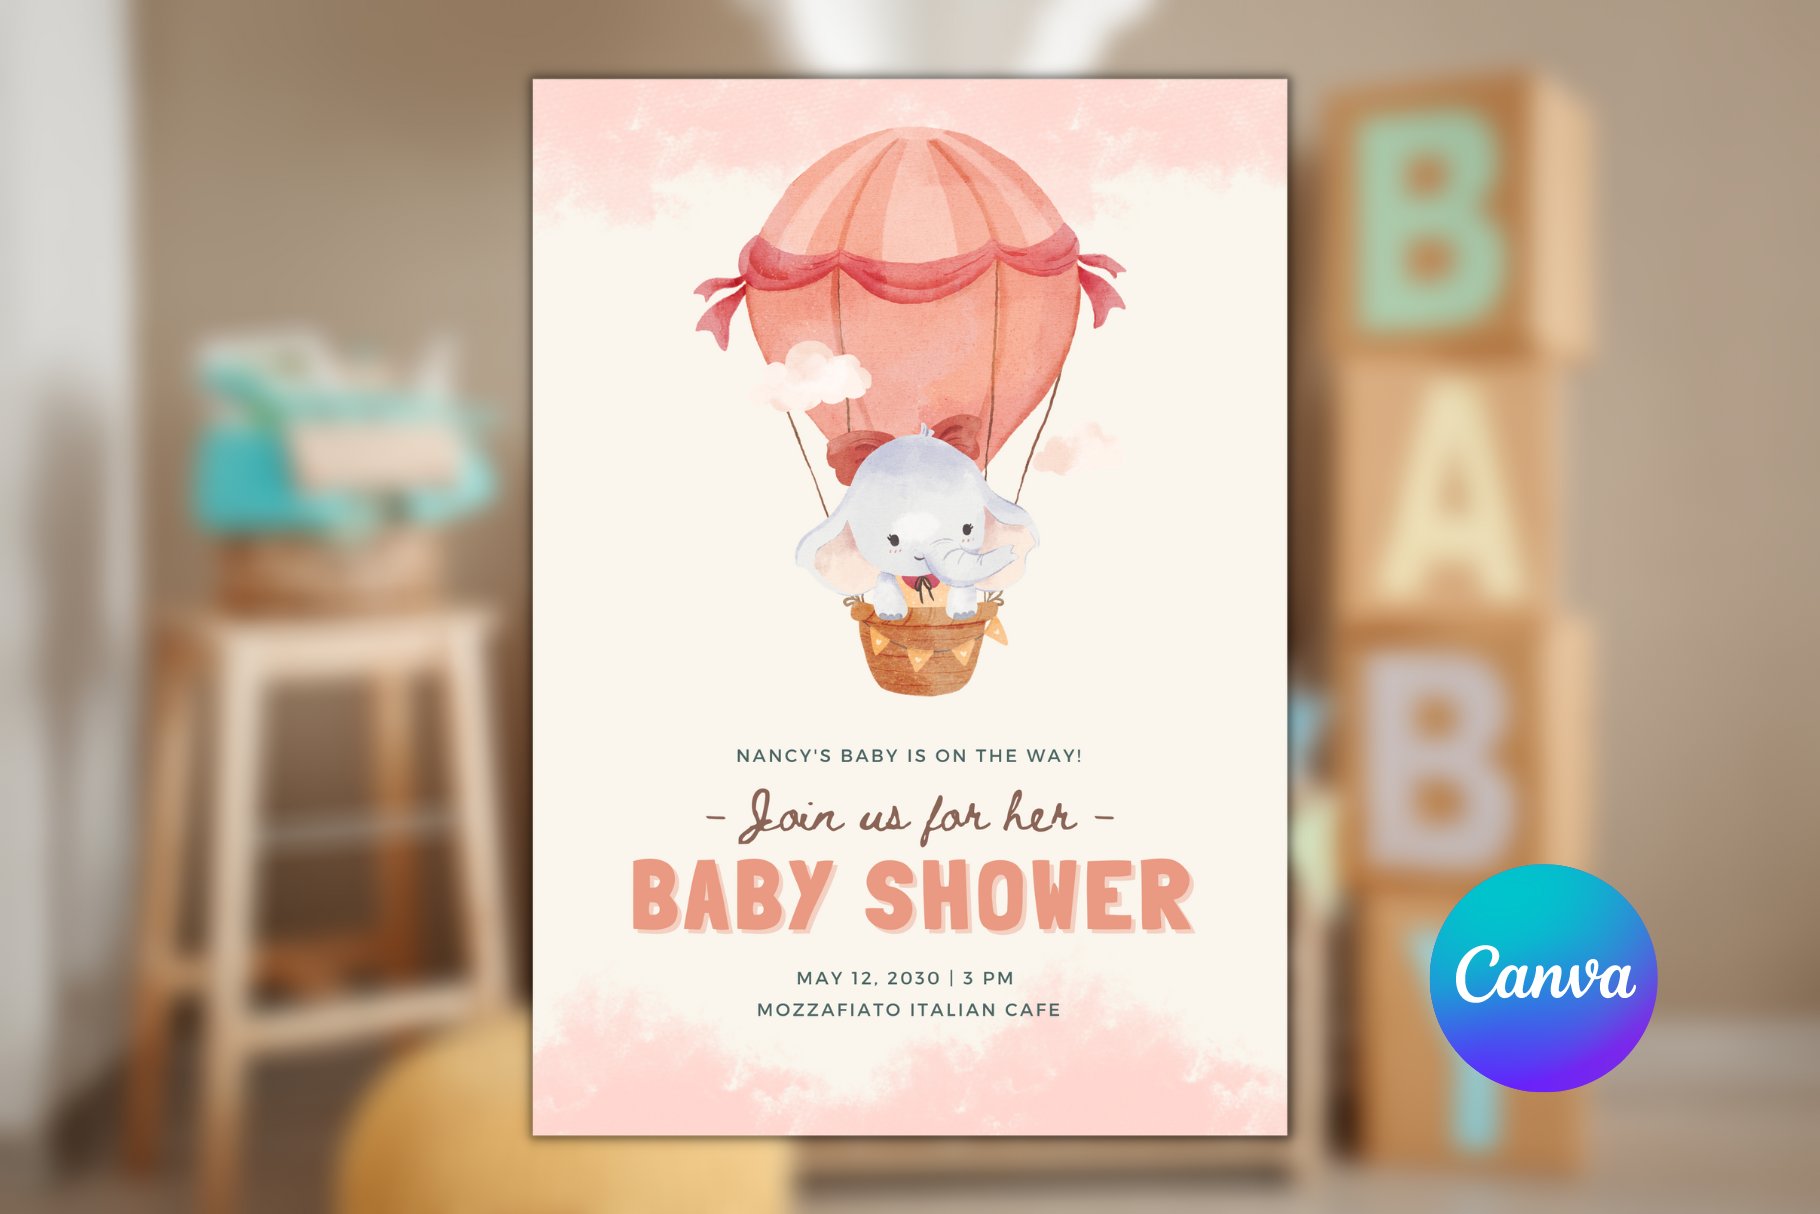 Baby Shower Invitation Template cover image.